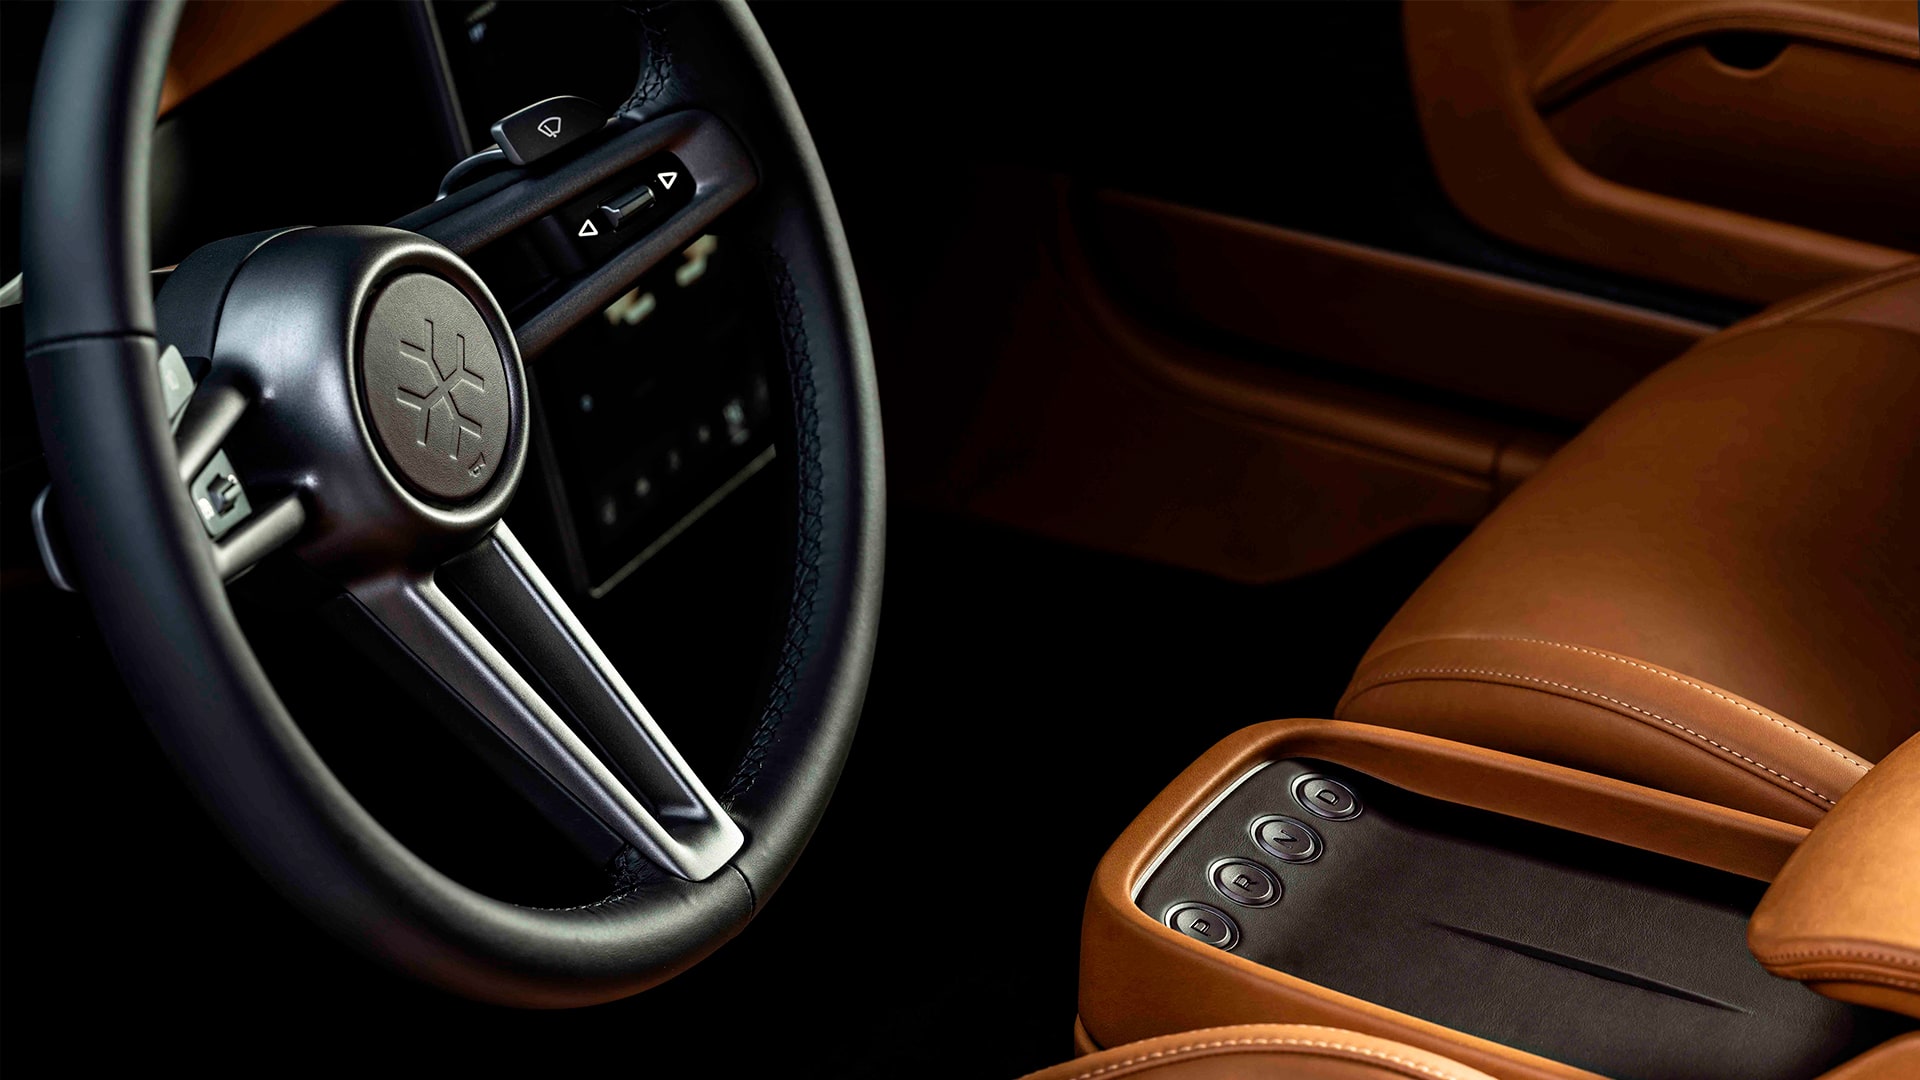 Details of the Charge Cars Interior including central console and steering wheel